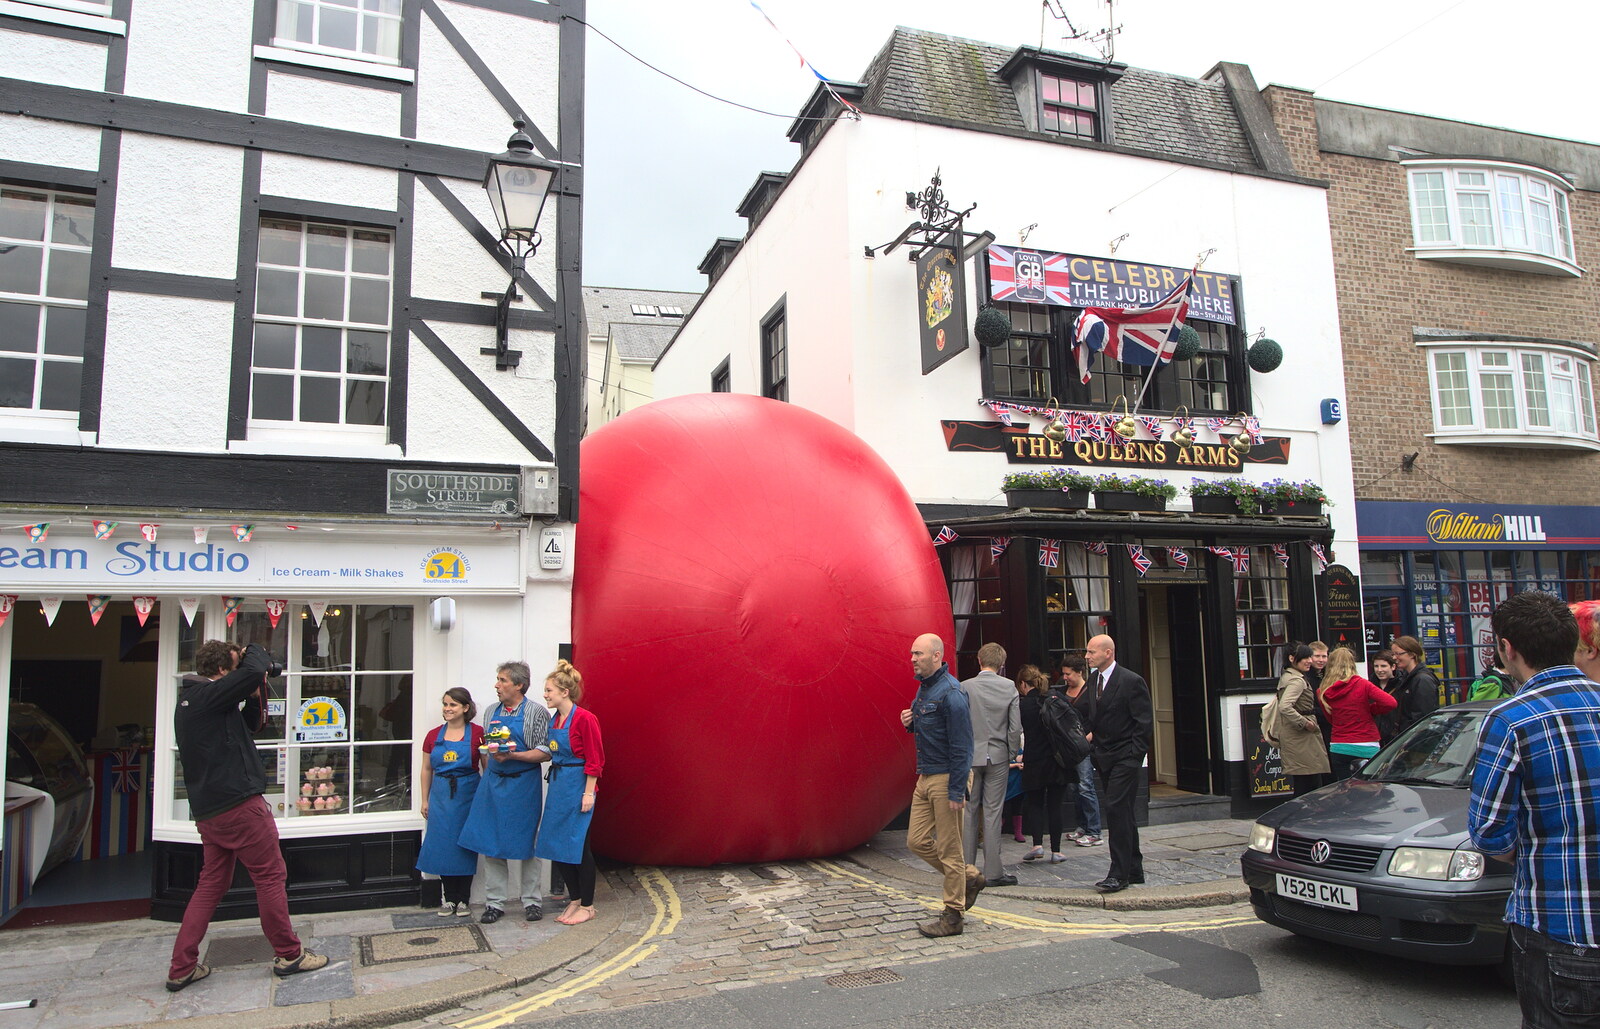 Crazy Red Ball action on Southside Street from A Visit to the Aquarium, The Barbican and Dartmoor, Plymouth, Devon - 10th June 2012